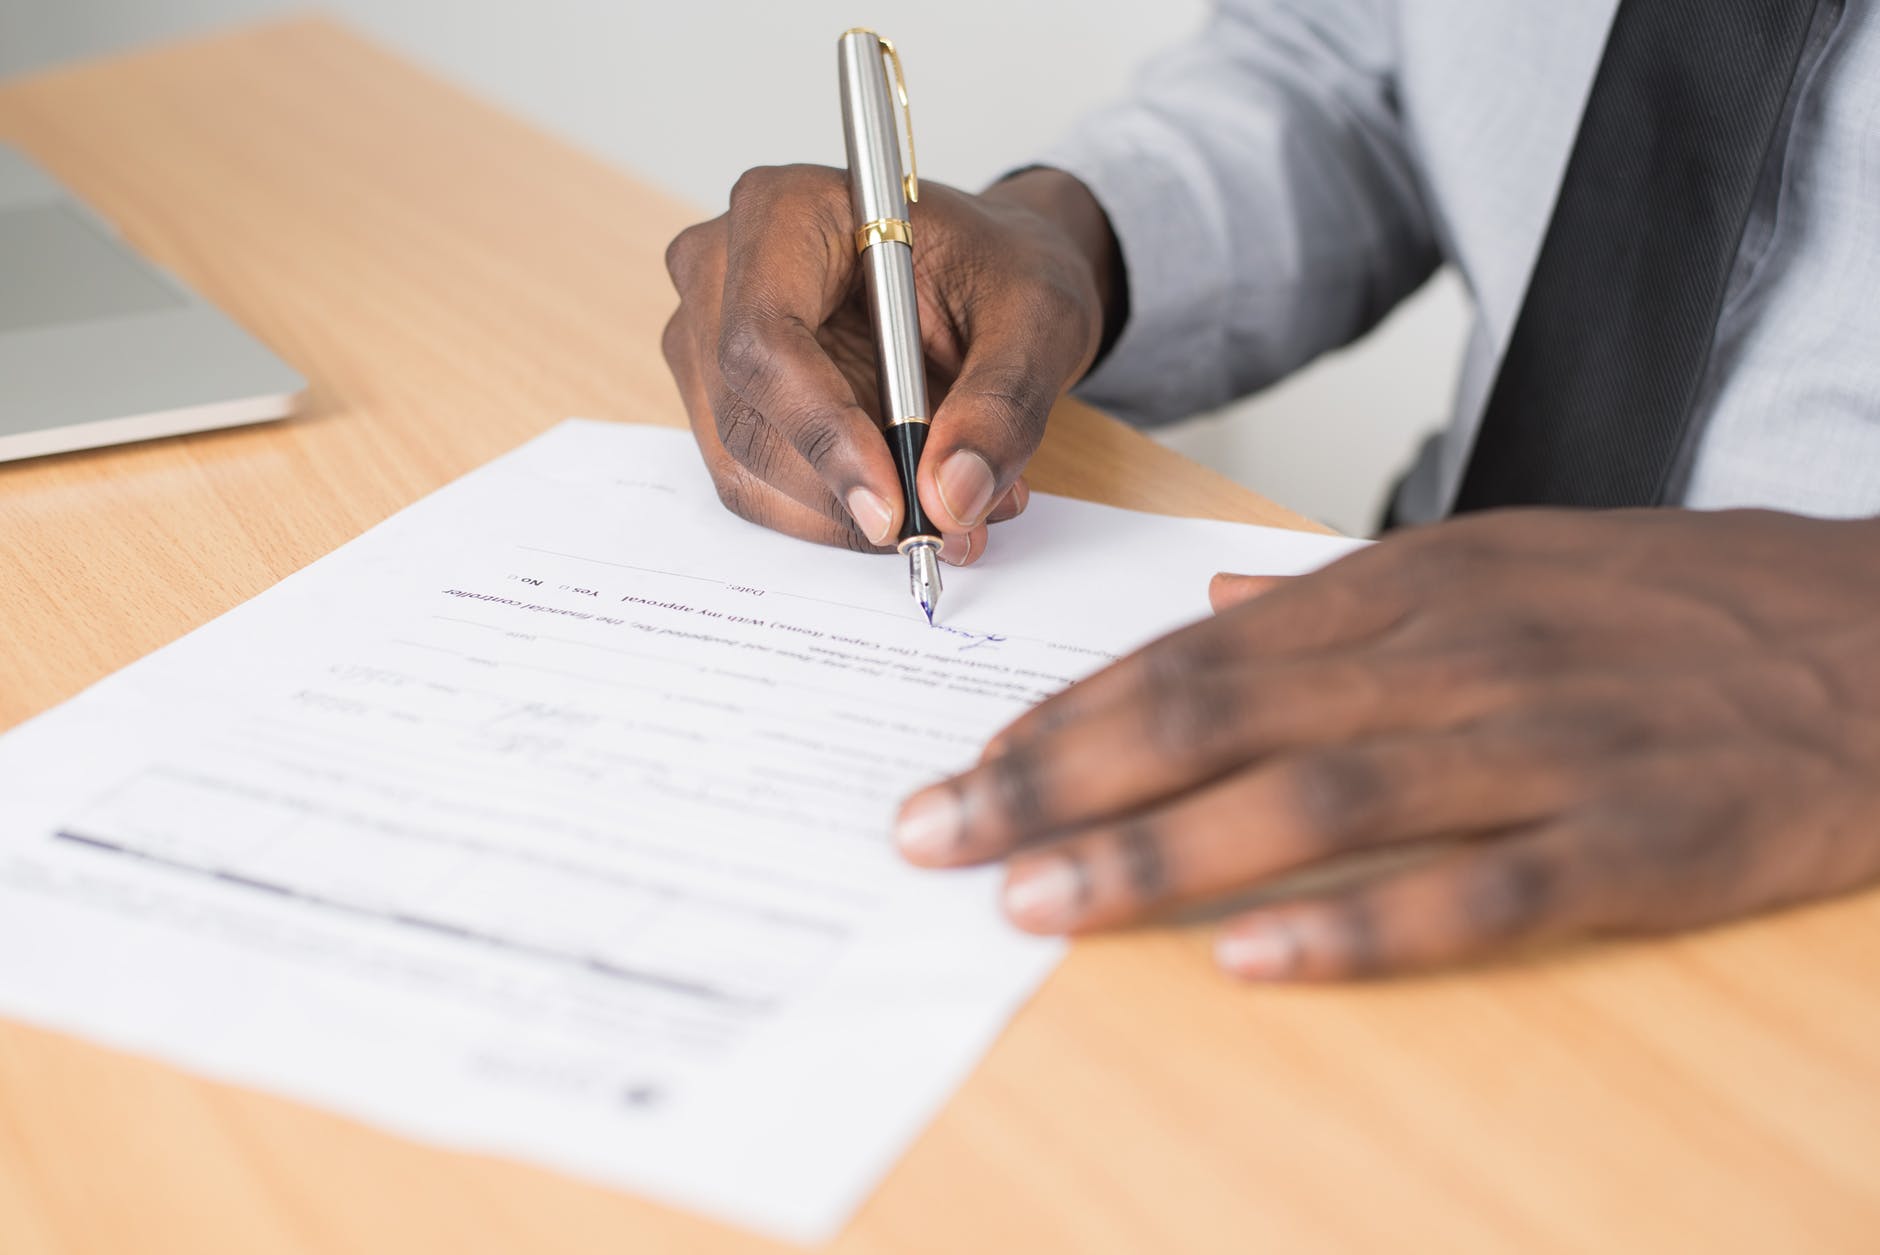 A man signing a legal document. Confidentiality is important when entering Kentucky recovery centers